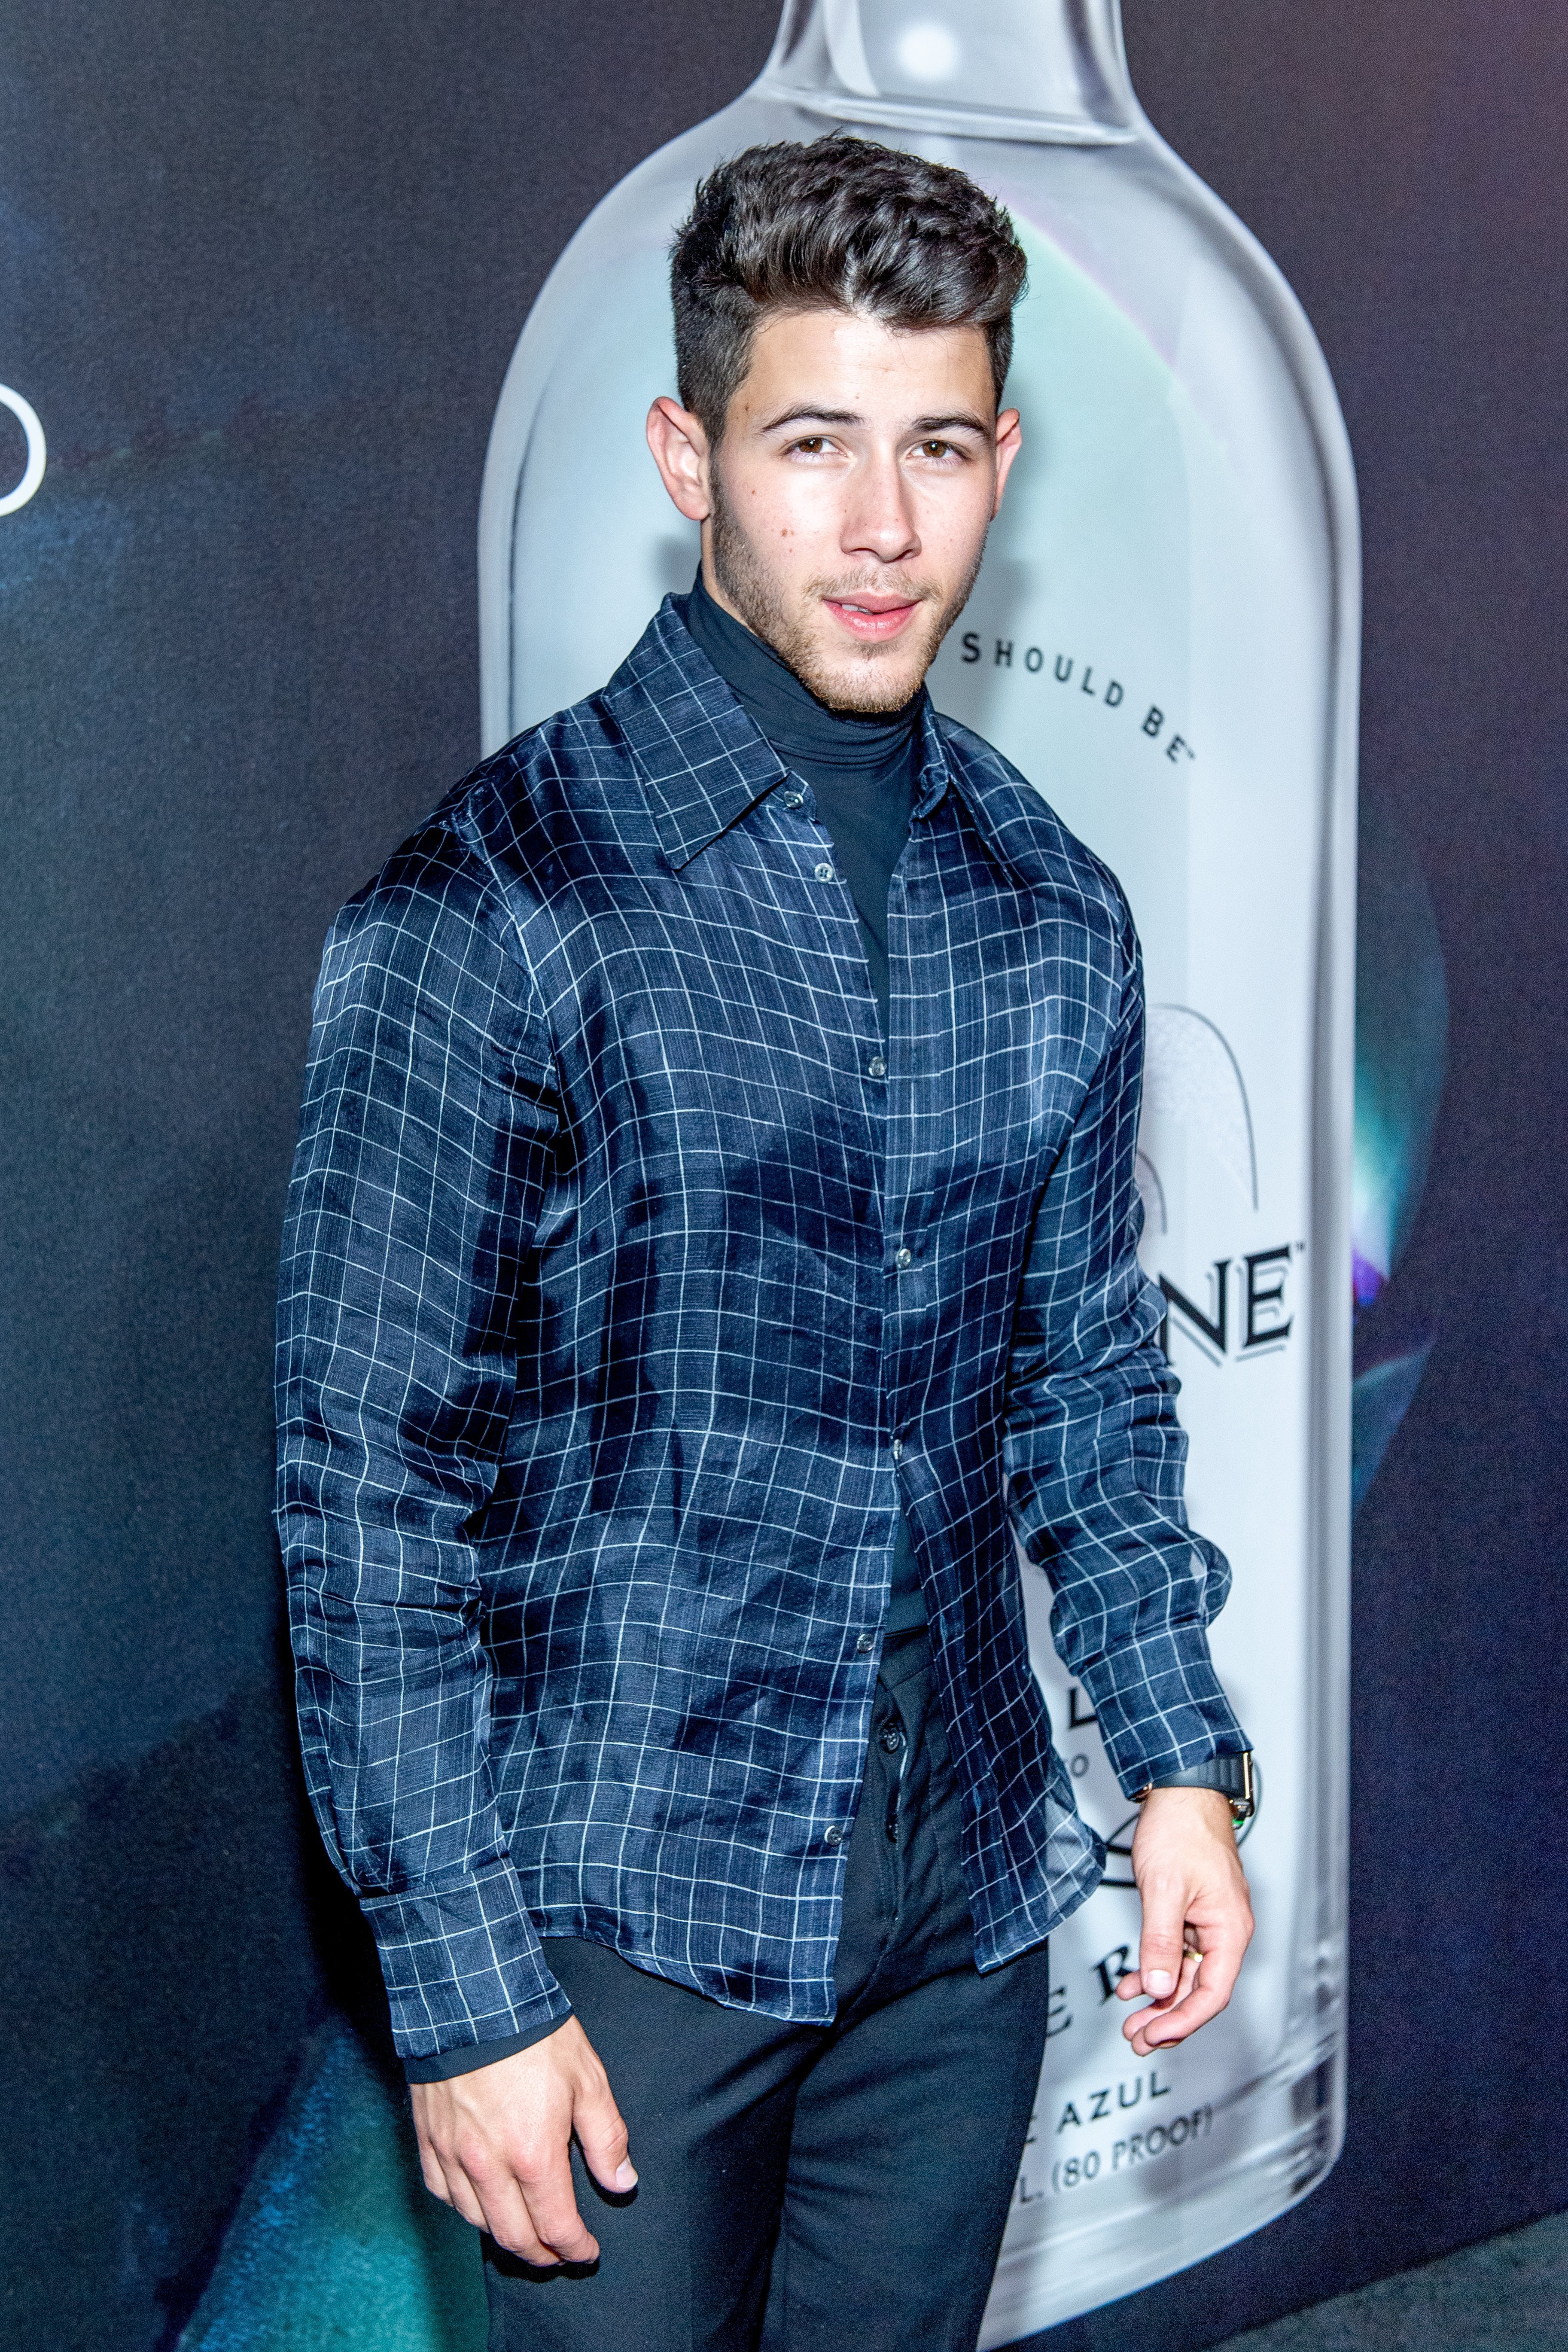 Nick Jonas attends Nick Jonas x John Varvatos Villa One Tequila Launch at John Varvatos Bowery NYC on August 29, 2019, in New York City. | Source: Getty Images.